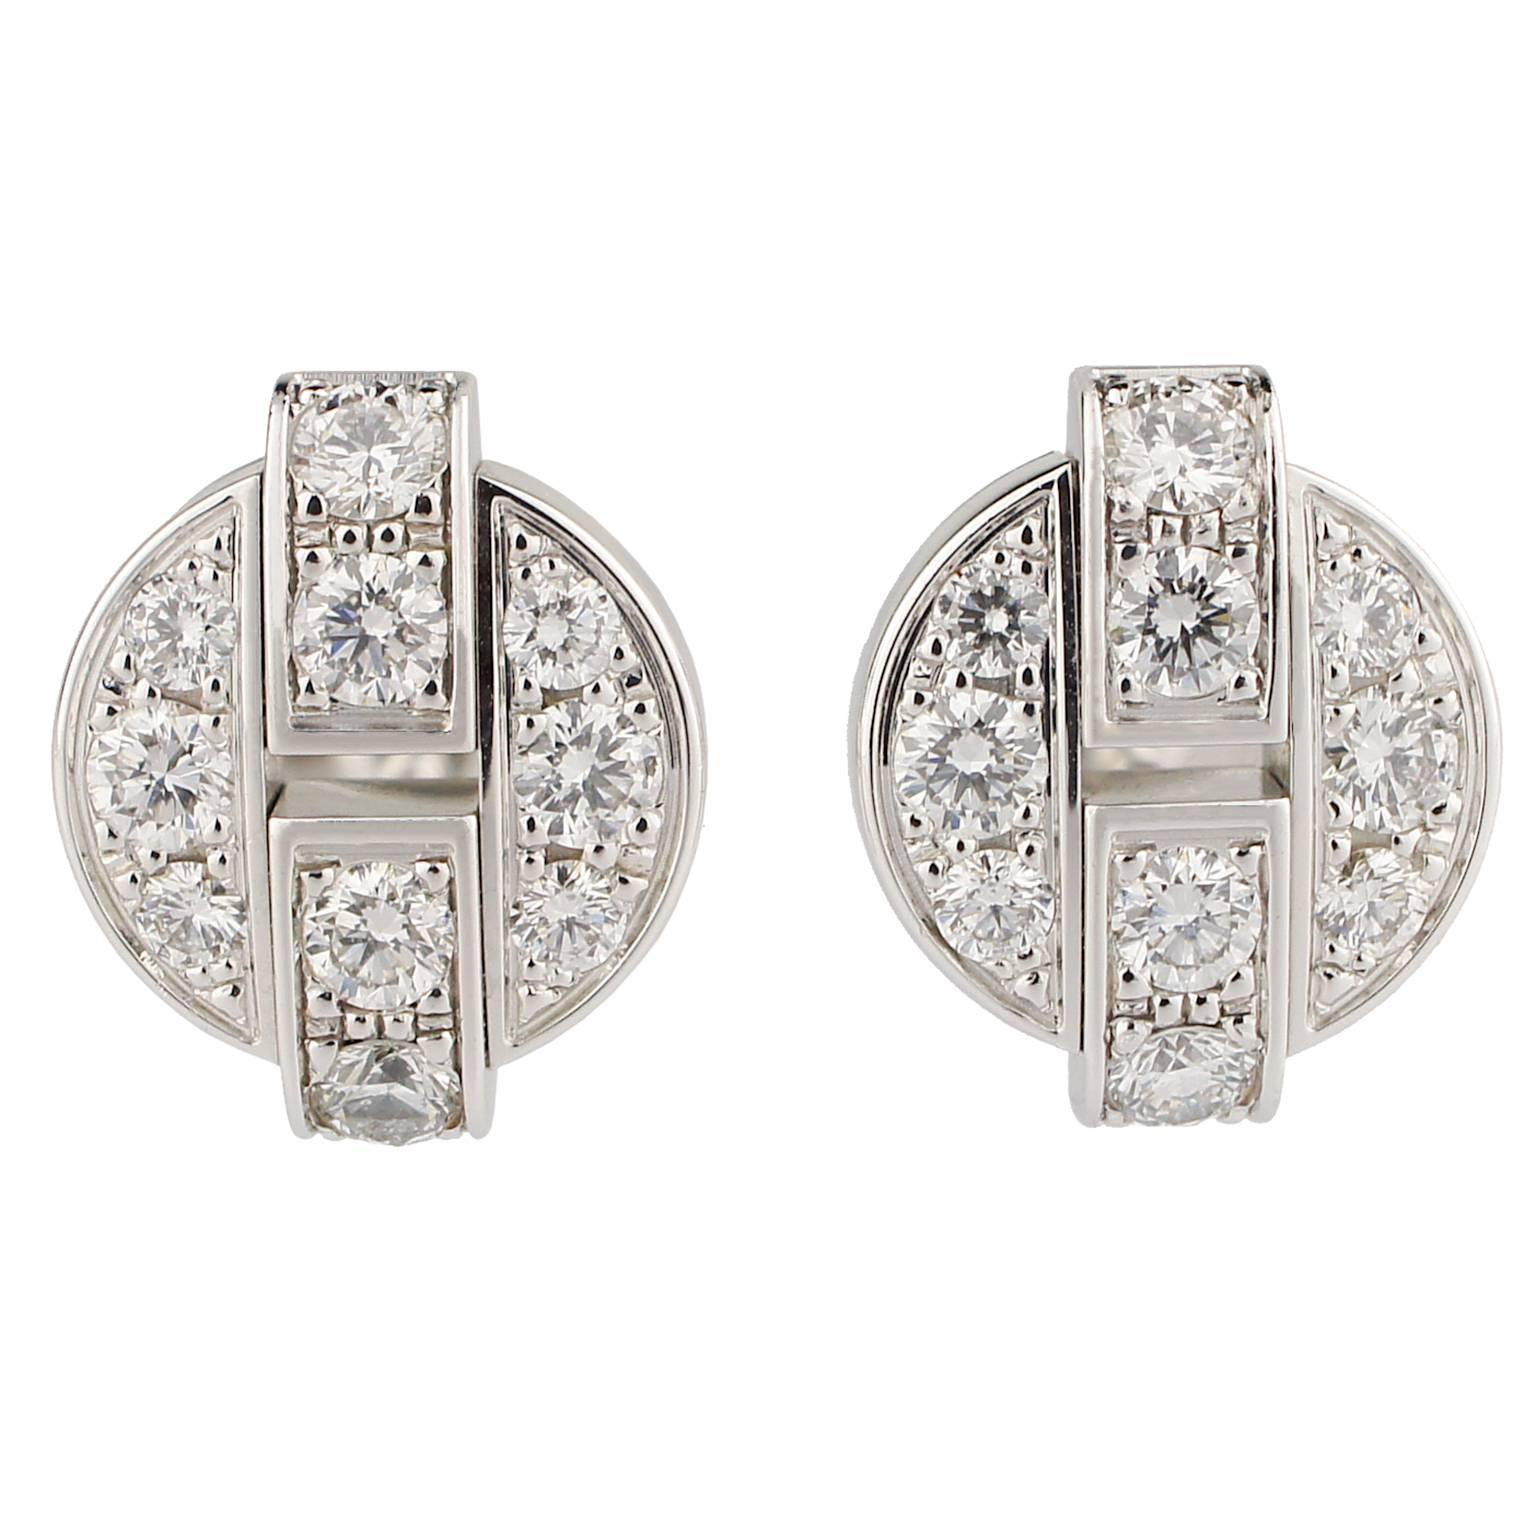 Cartier stud earrings from the Himalia collection, set with 20 round brilliant cut diamonds totalling 0.34 carats.